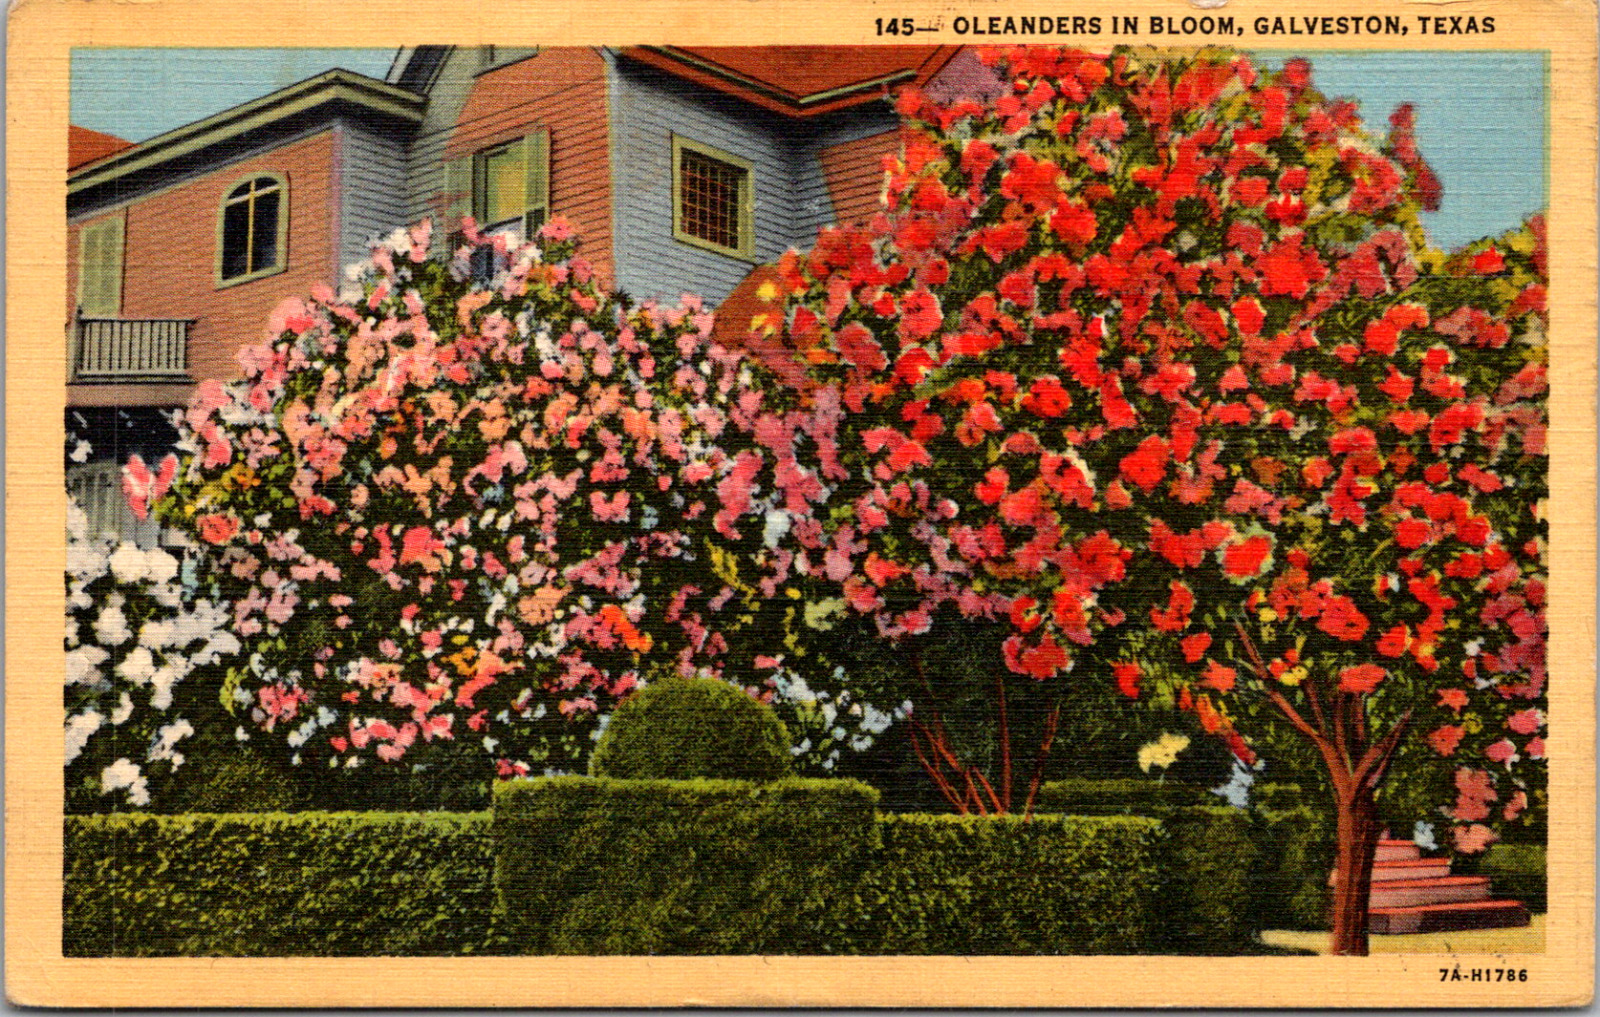 Vintage 1940\'s Lovely Oleanders in Bloom at a Galveston Texas Home TX Postcard